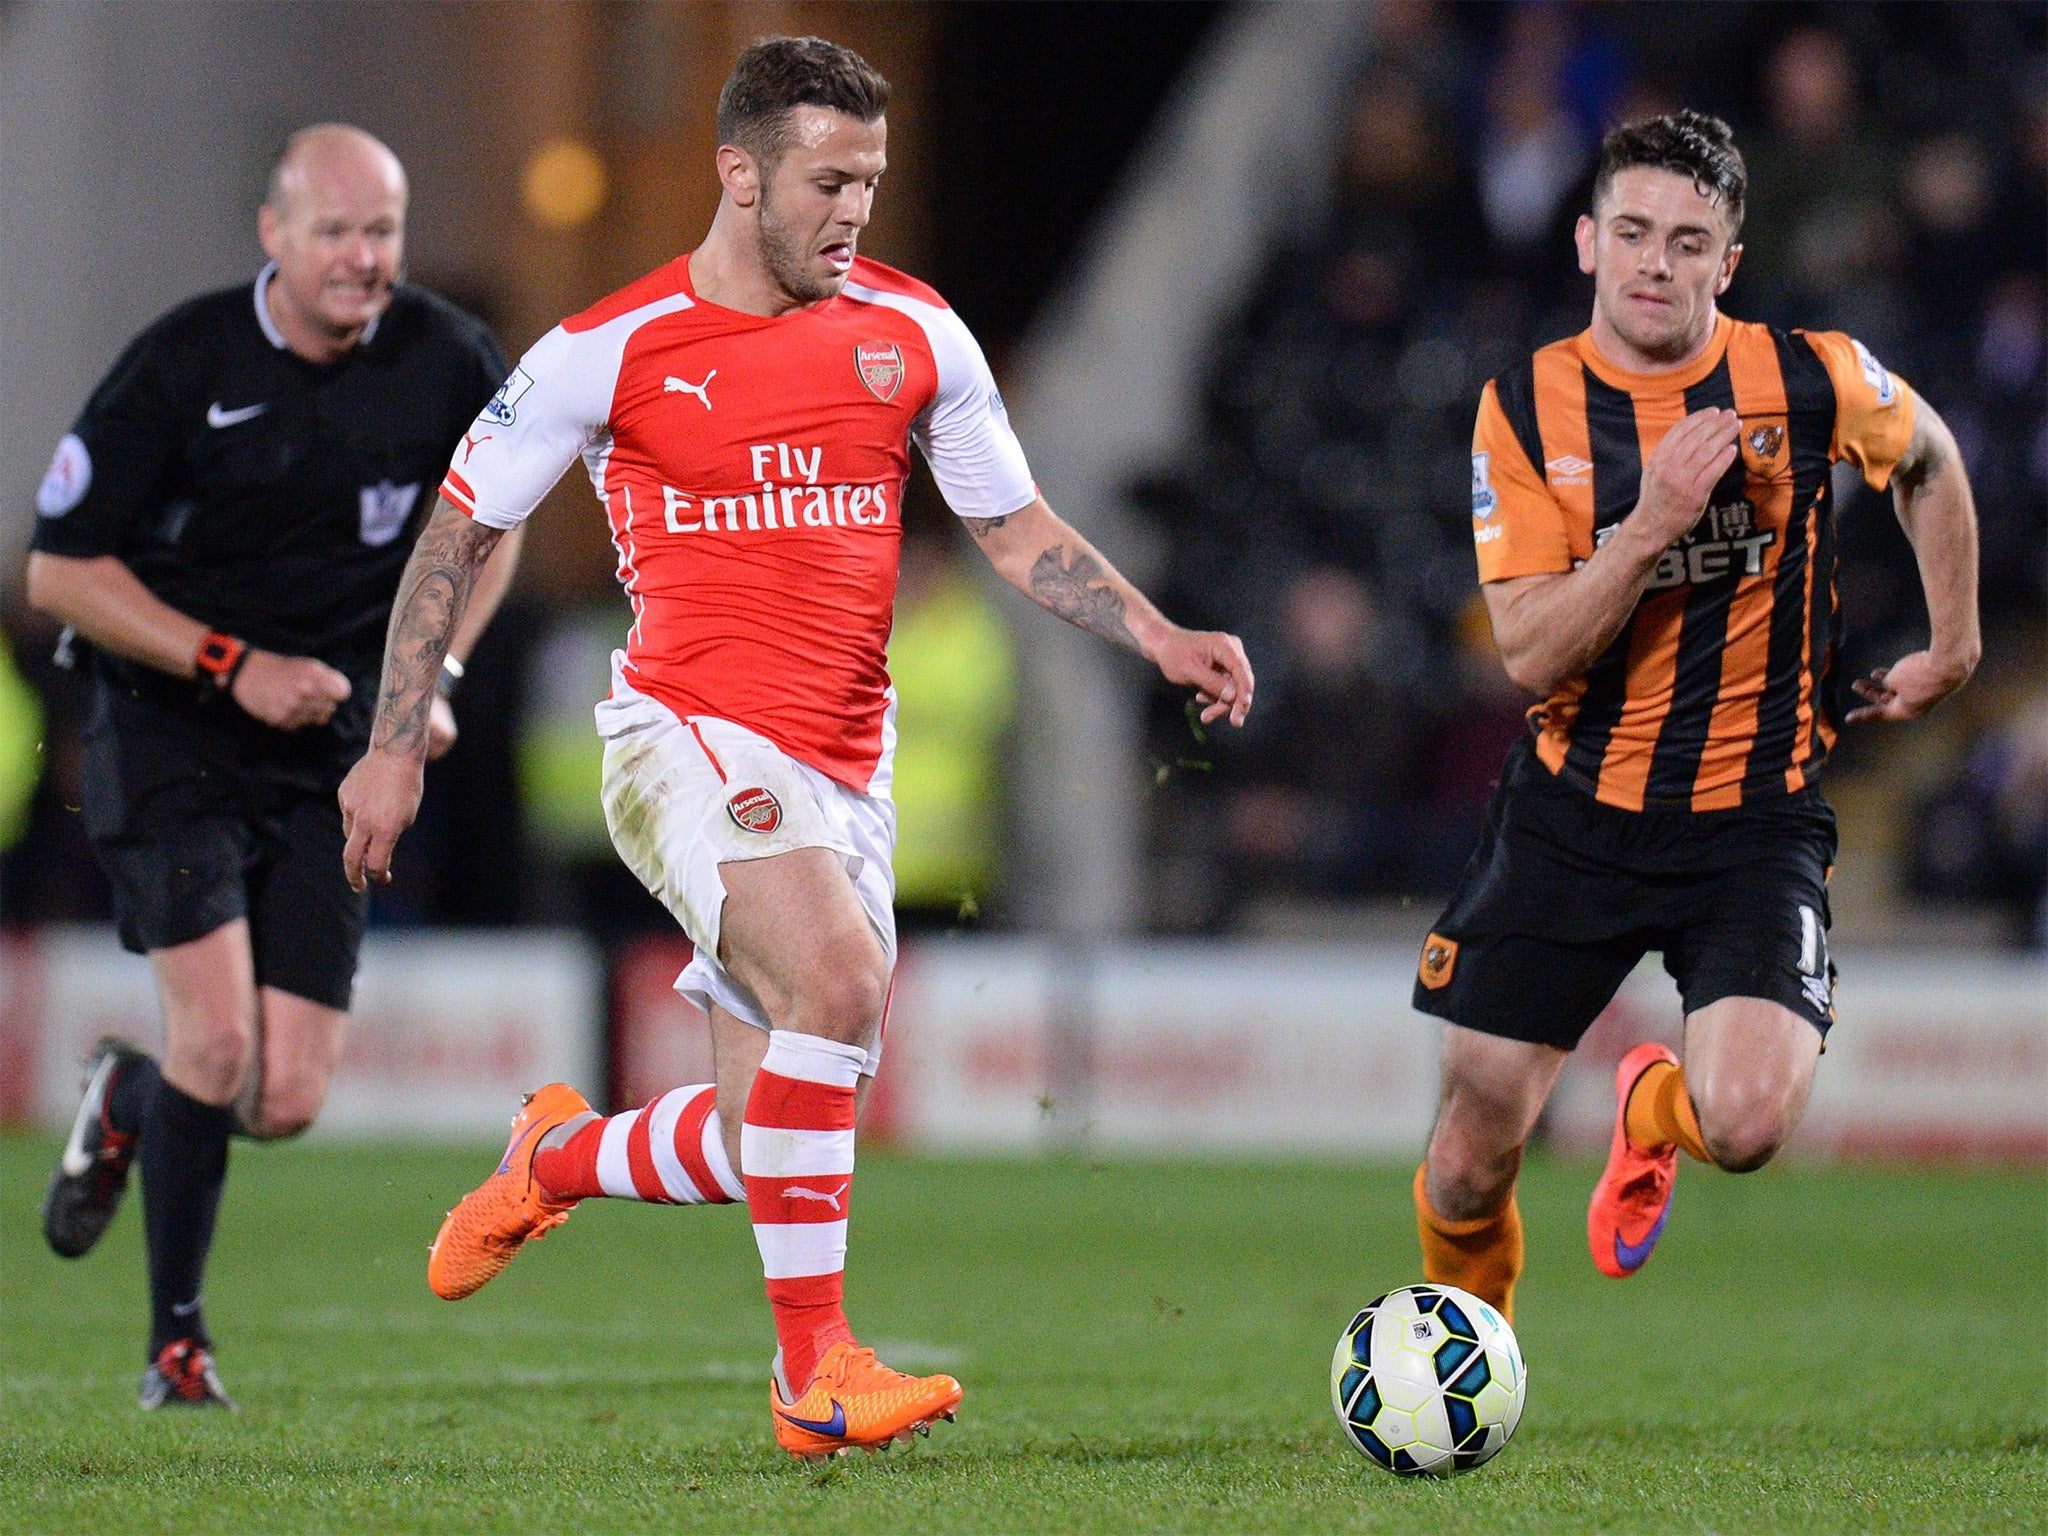 Jack Wilshere looked sharp in his return from injury